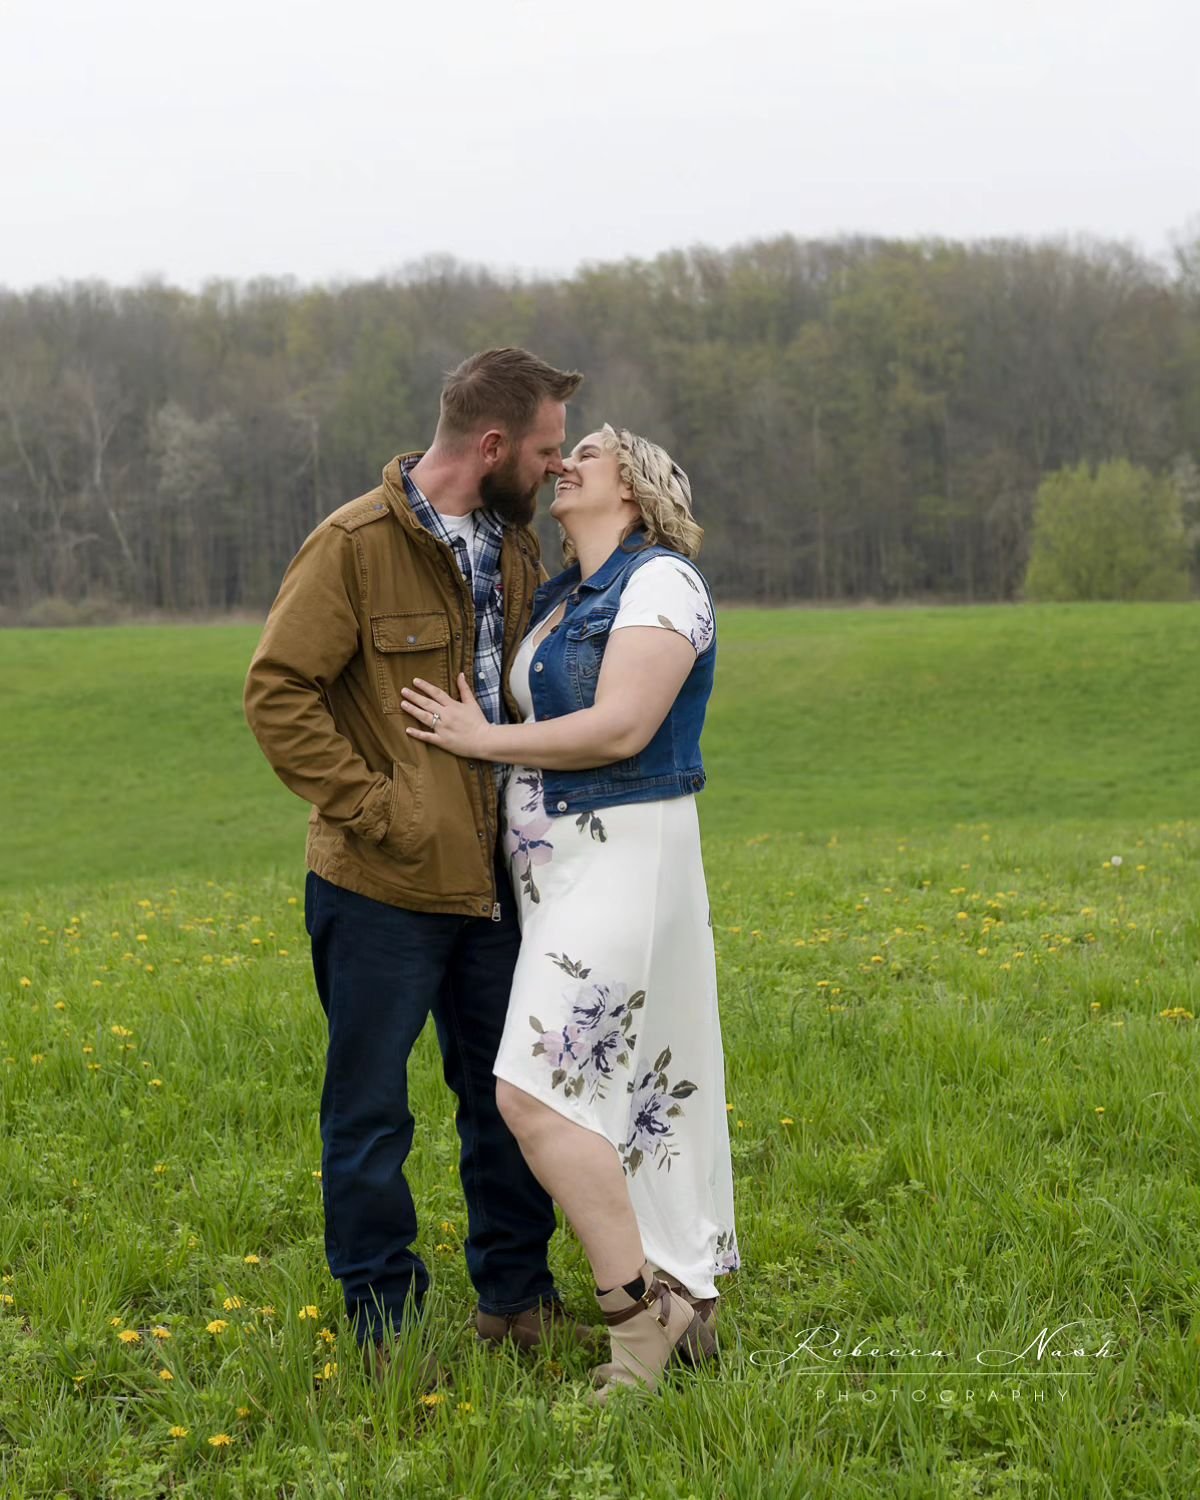 In just over 2 hours these lovebirds will be saying I do!

Happy Wedding Day Ashley &amp; Ryan!

Thrilled to be a part of your celebration
.
.
.
Photography - Rebecca Nash Photography @rebeccanashphotography
Venue &amp; Catering - Best Western Stoner